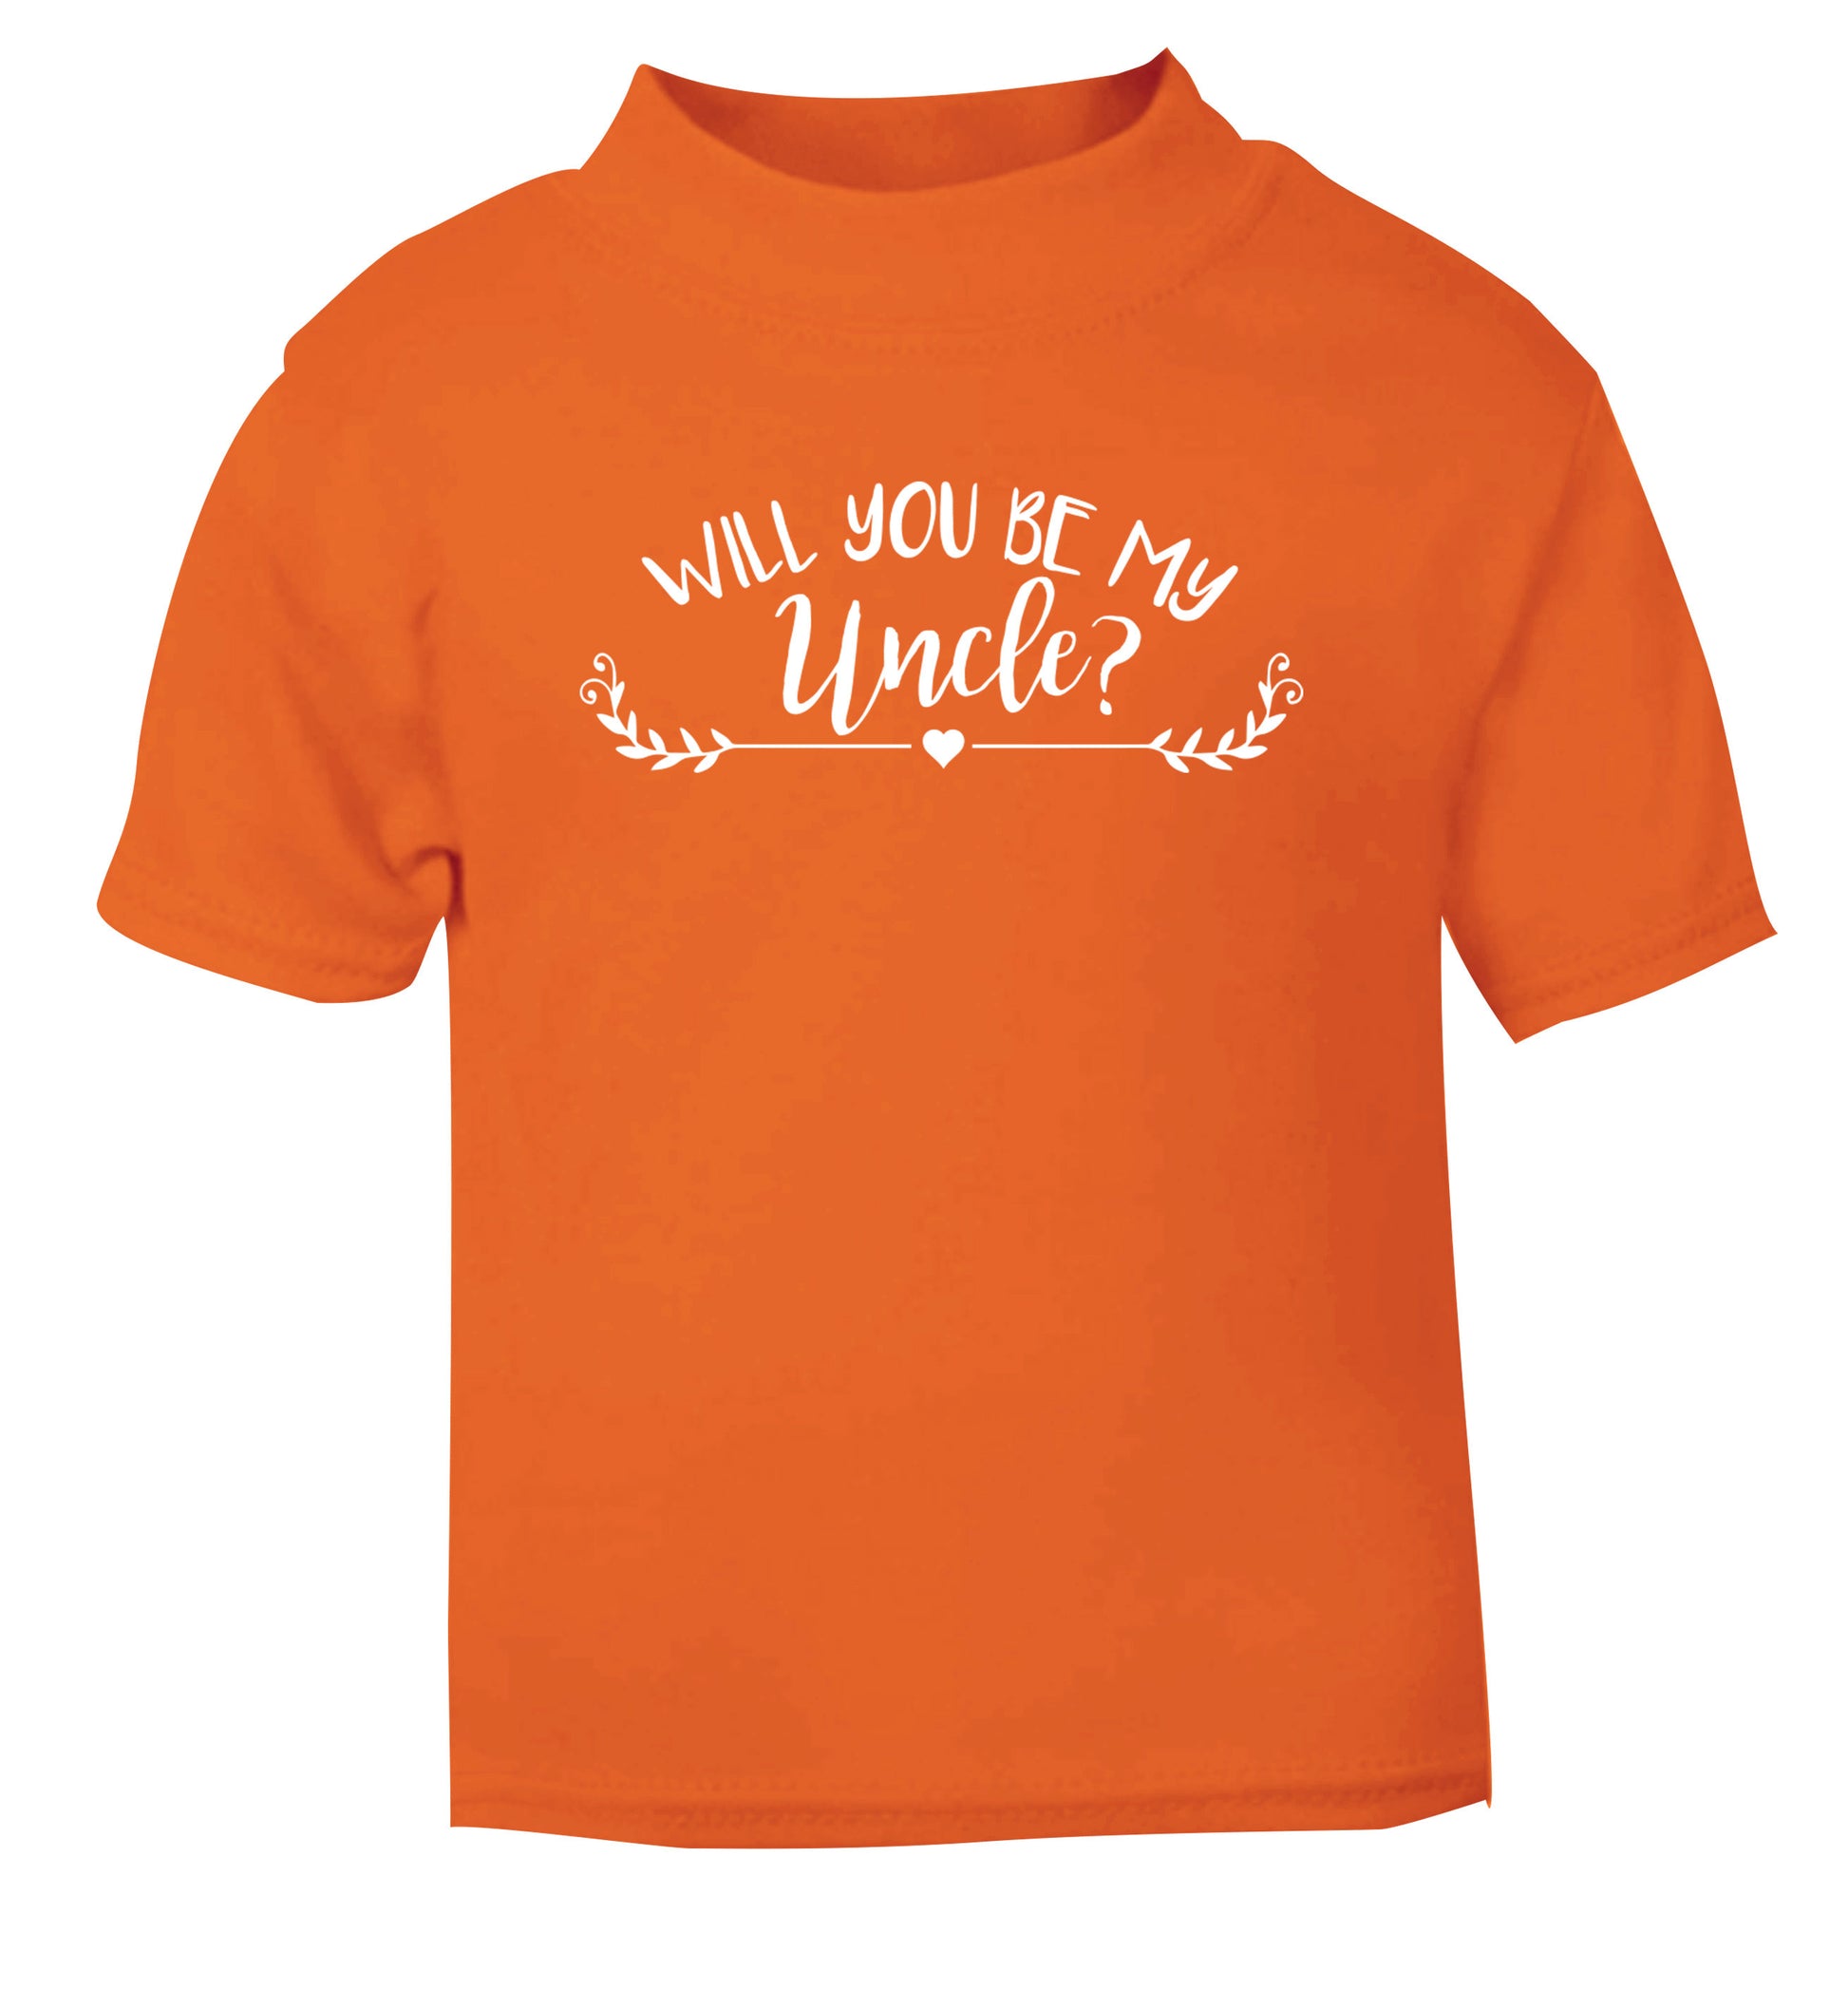 Will you be my uncle? orange Baby Toddler Tshirt 2 Years